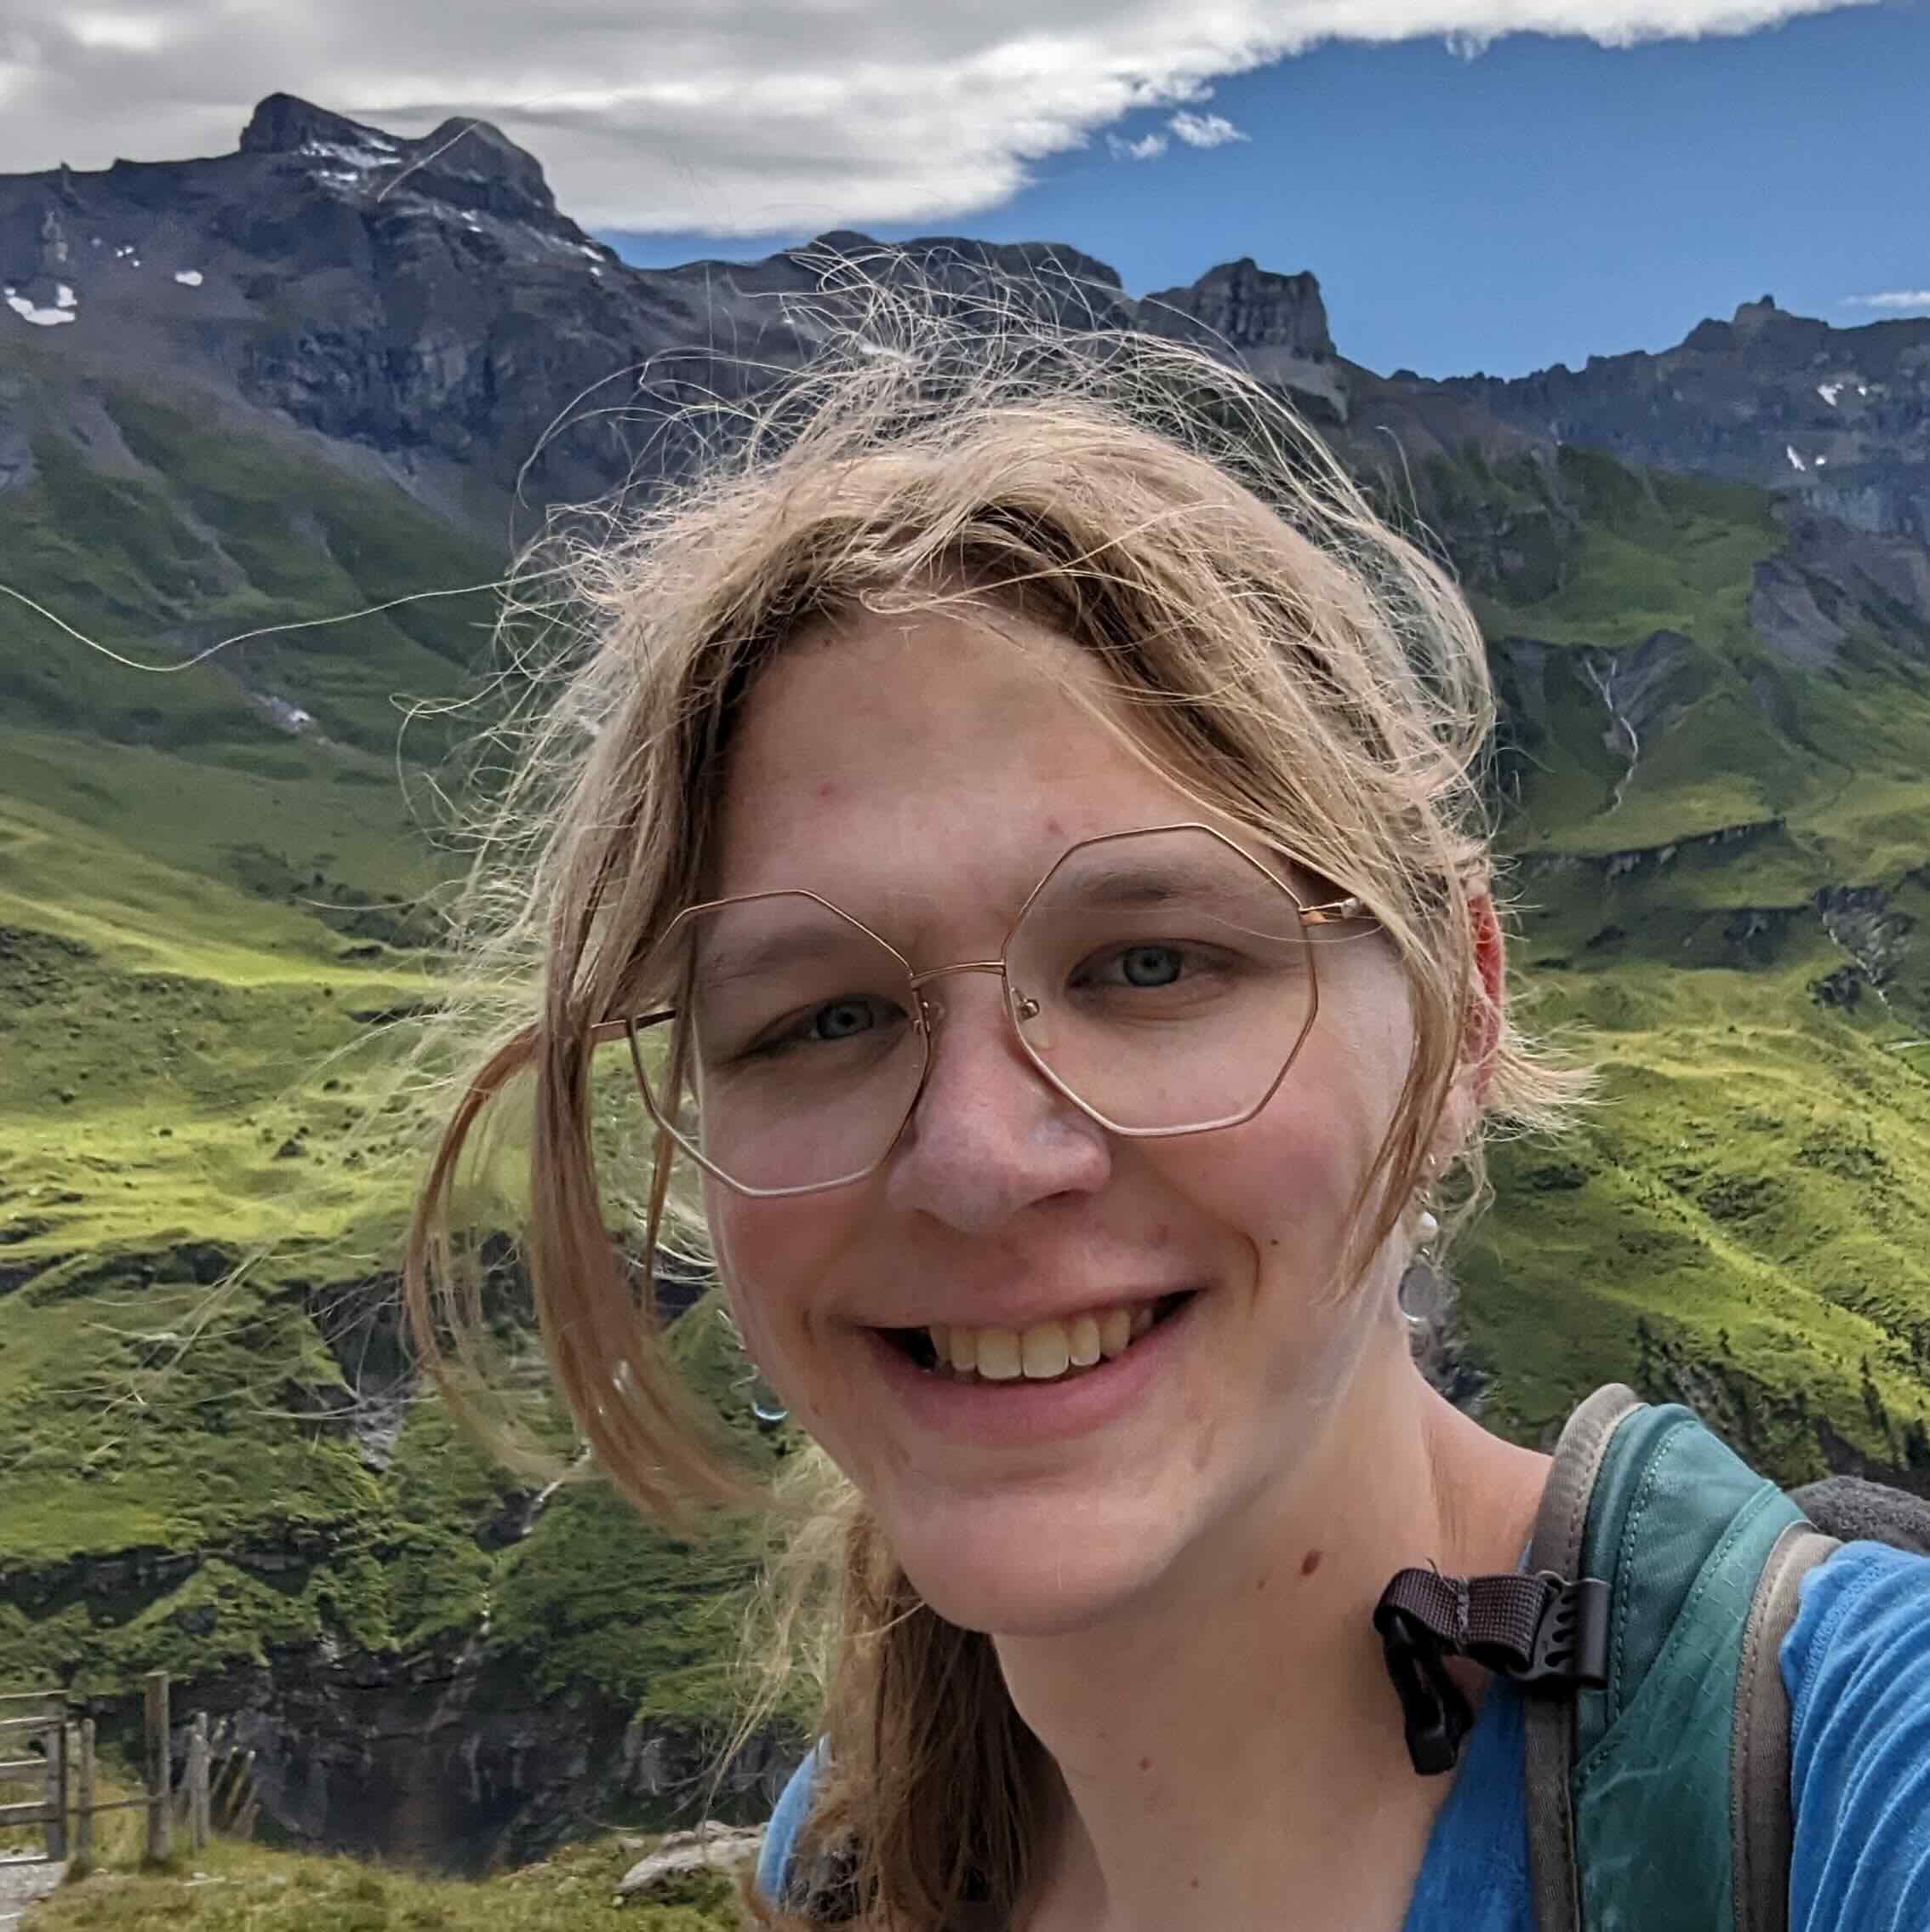 Photo of me on a hike in Switzerland